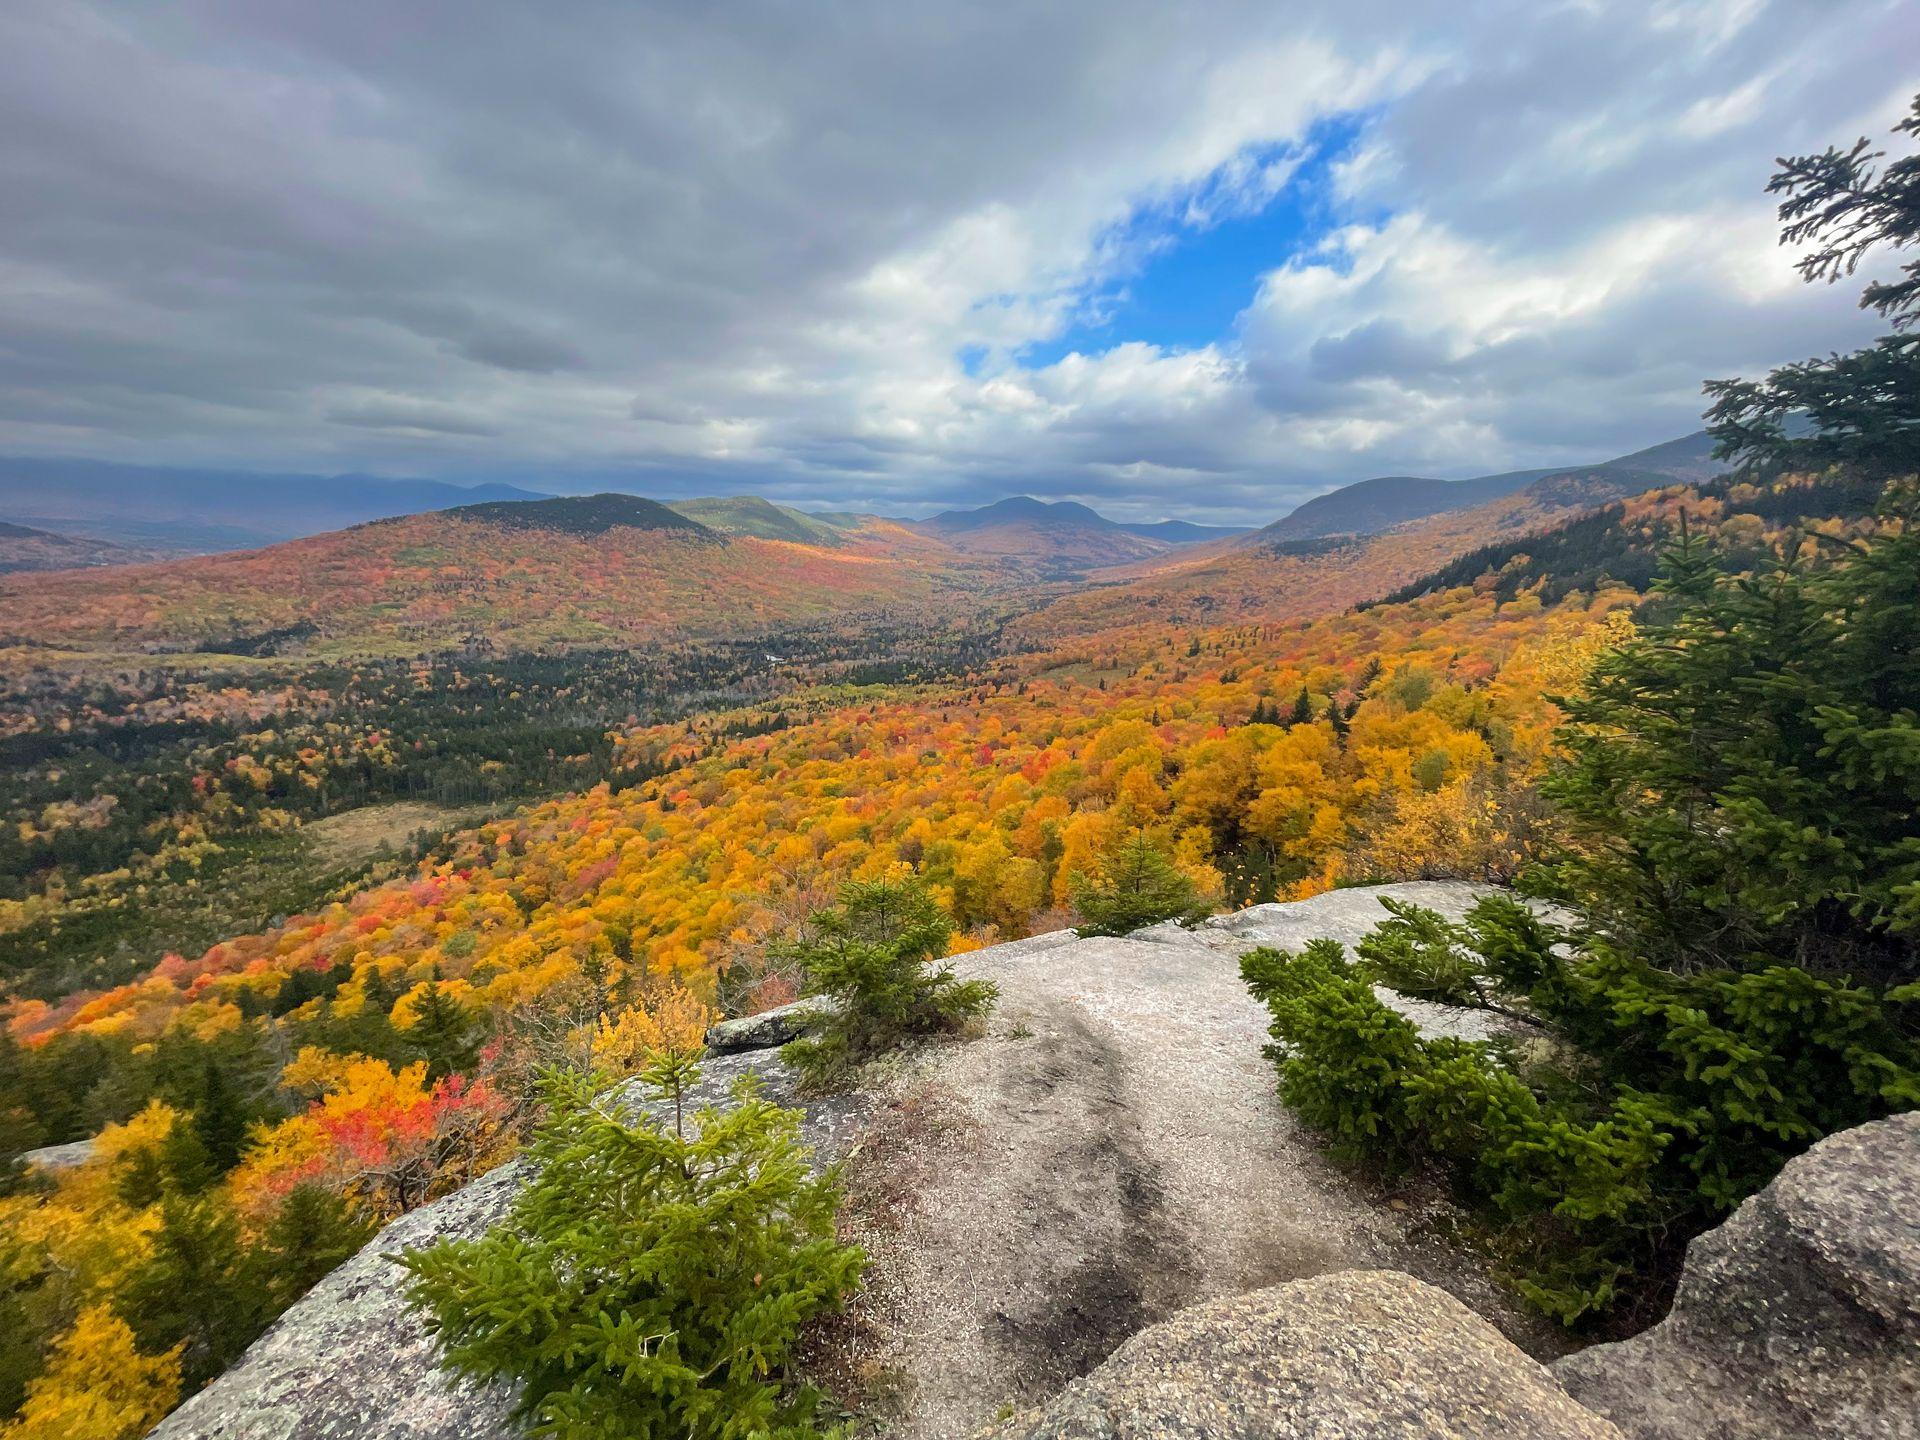 A beautiful view of mountains covered in fall foliage seen from North Sugar Peak in New Hampshire.